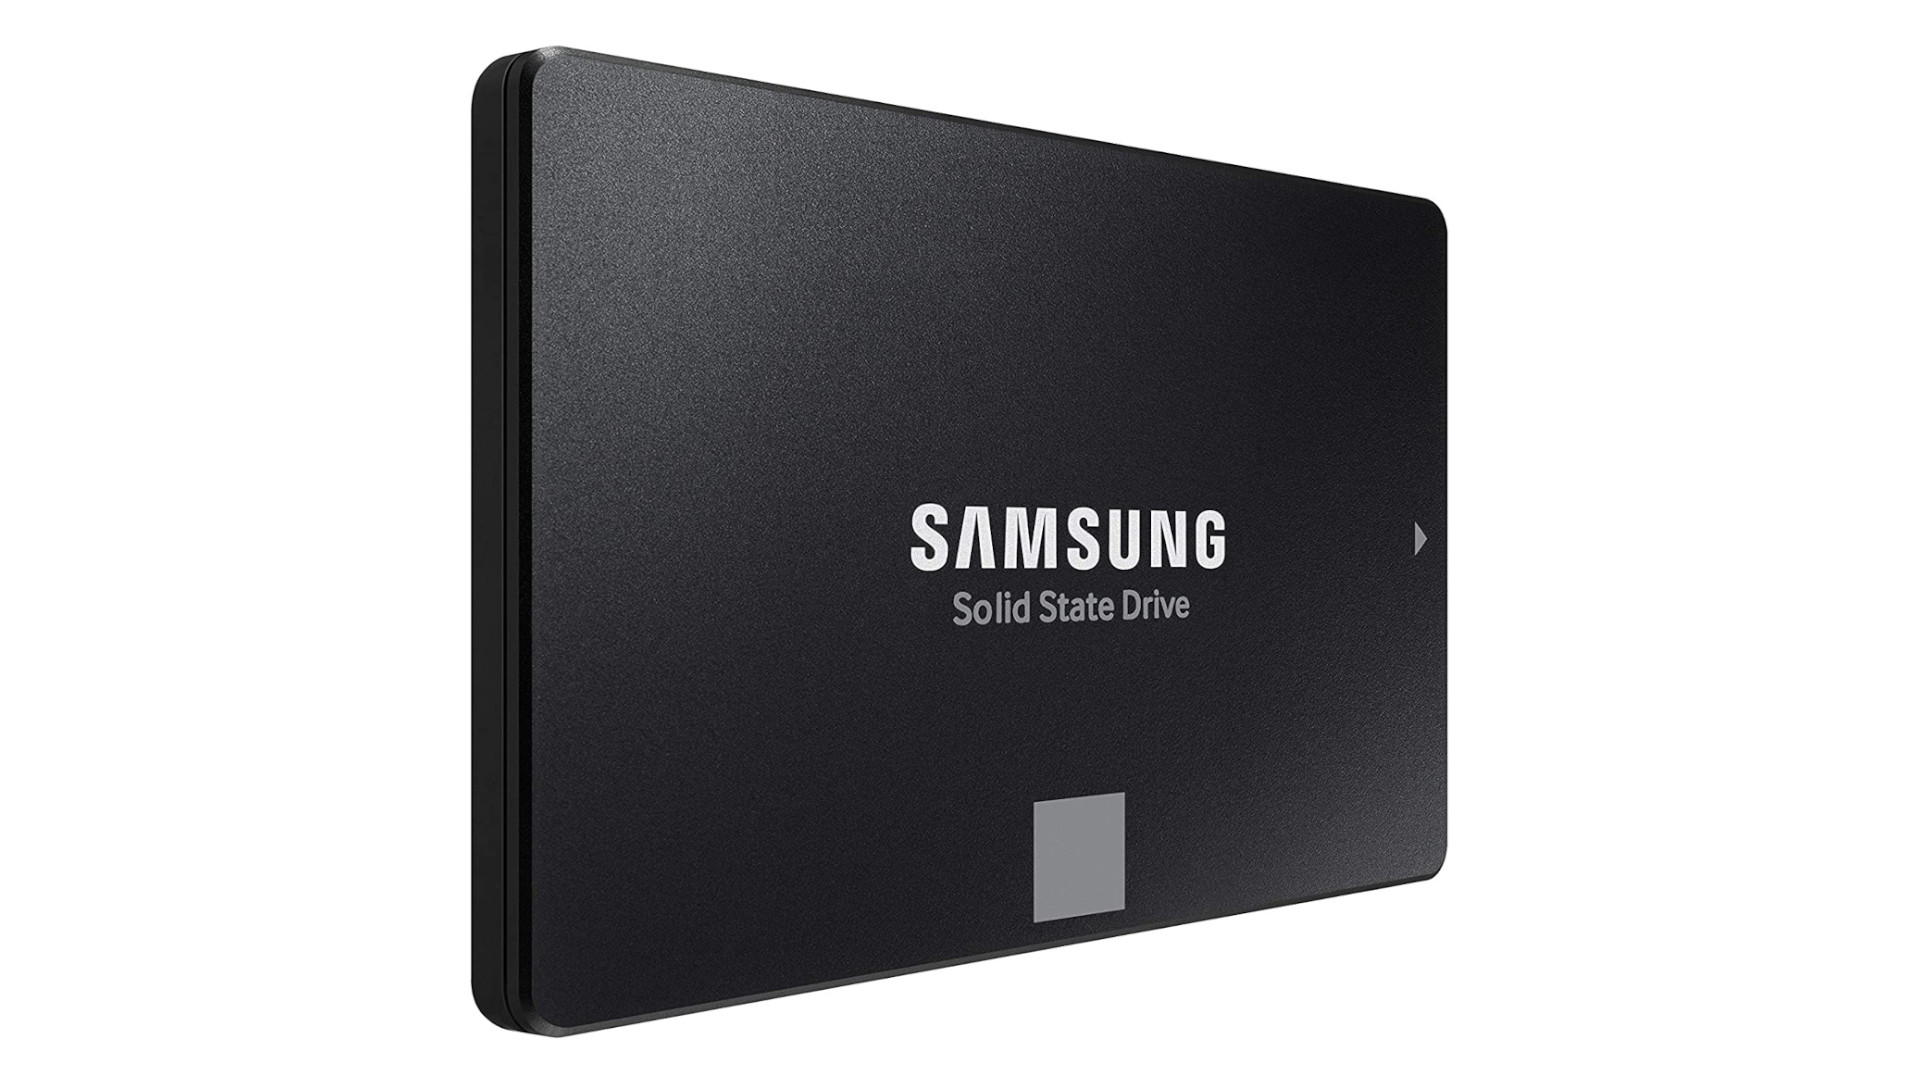 The best SATA SSD is the Samsung 870 EVO